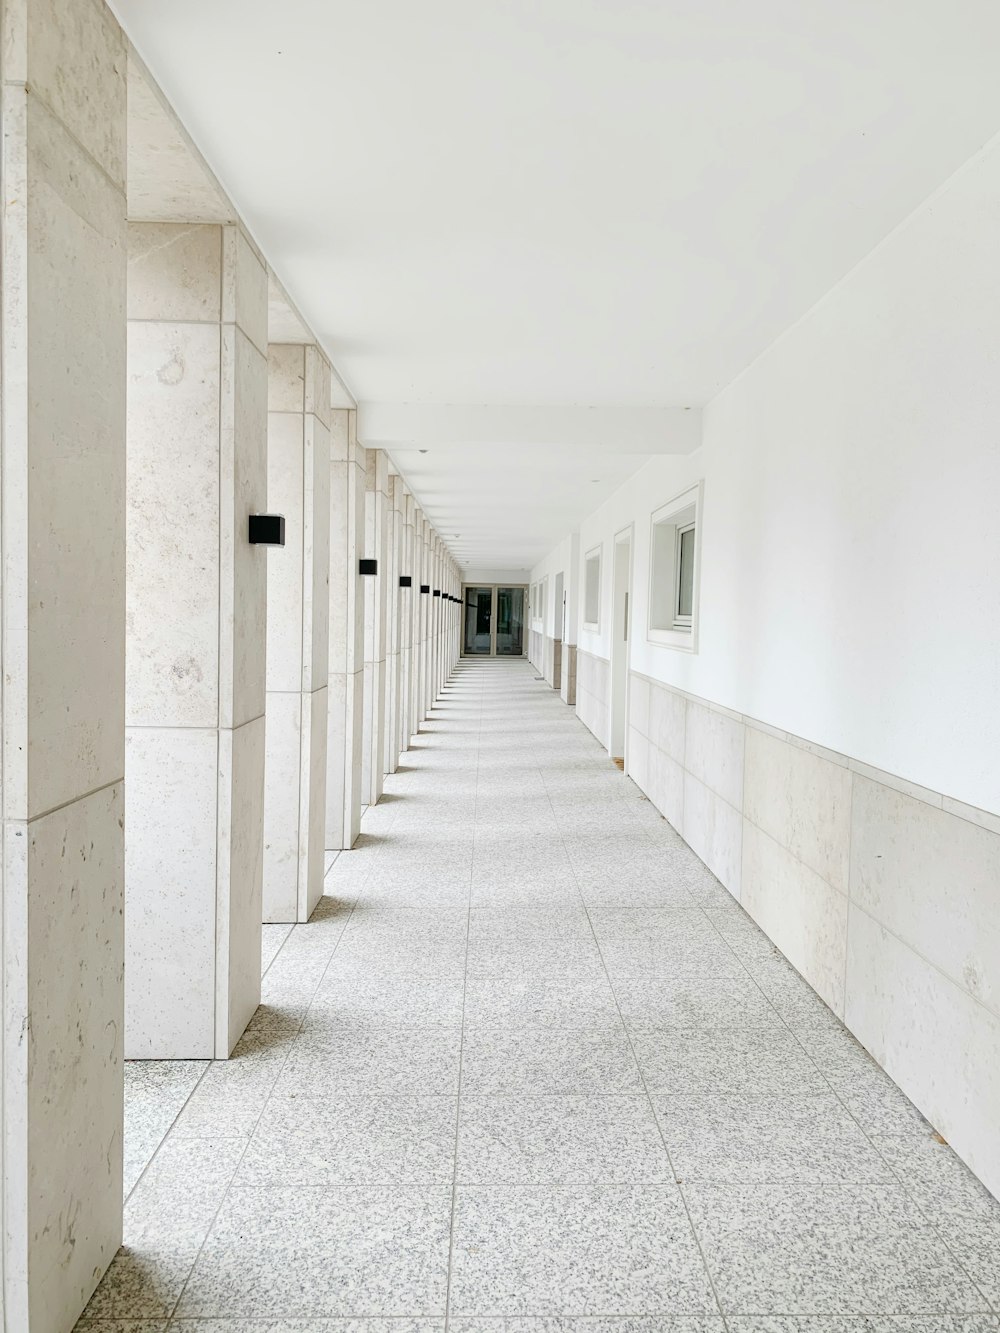 a long hallway lined with white walls and doors